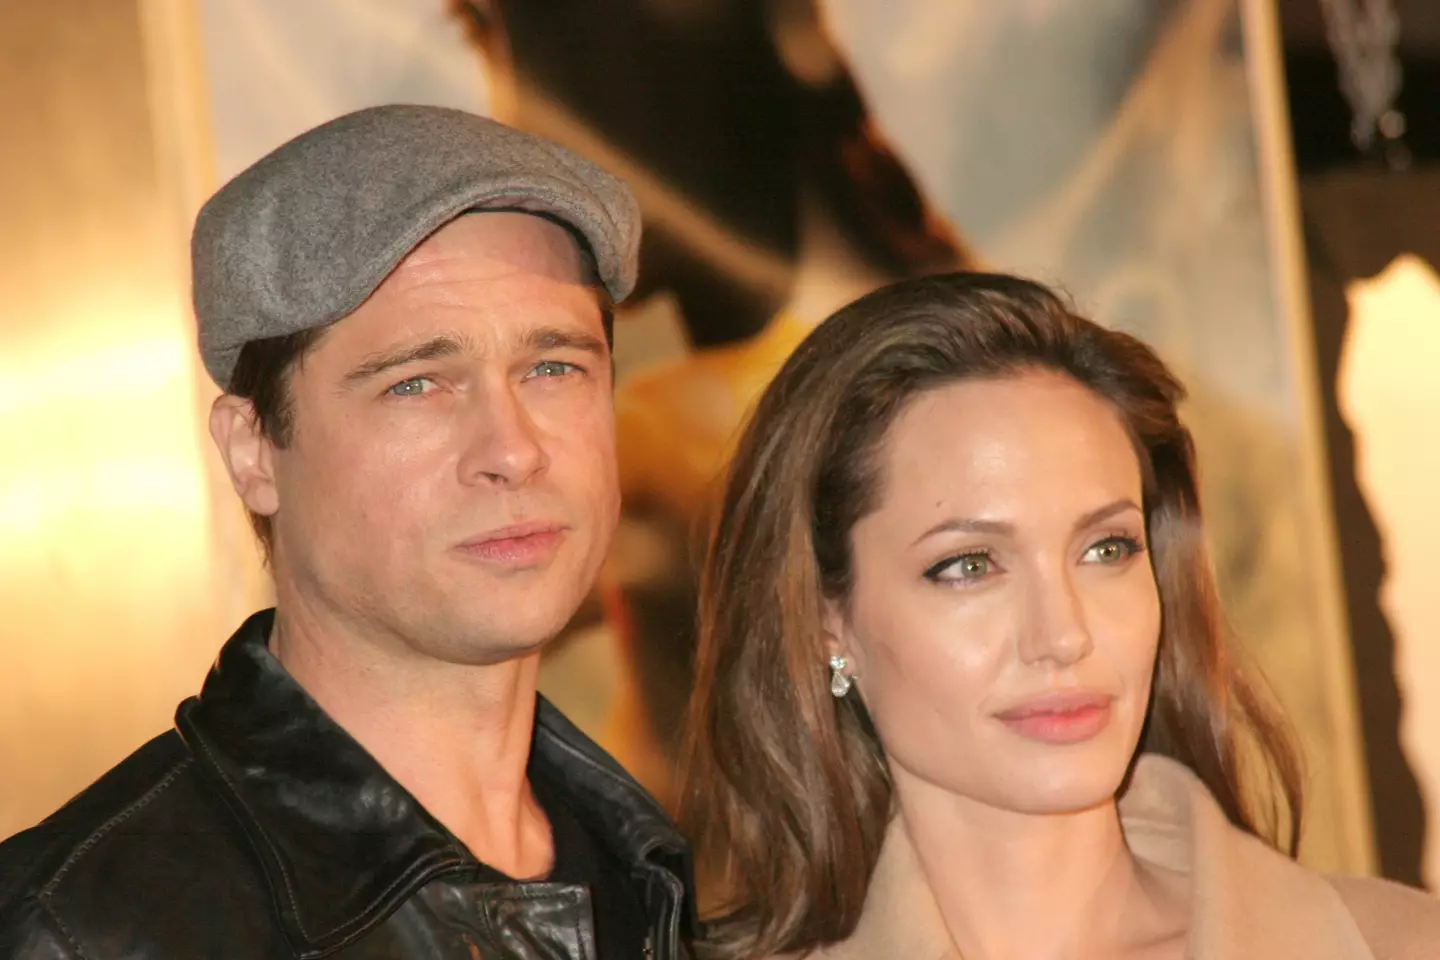 Brad Pitt has responded to explosive abuse claims made by his ex-wife Angelina Jolie.